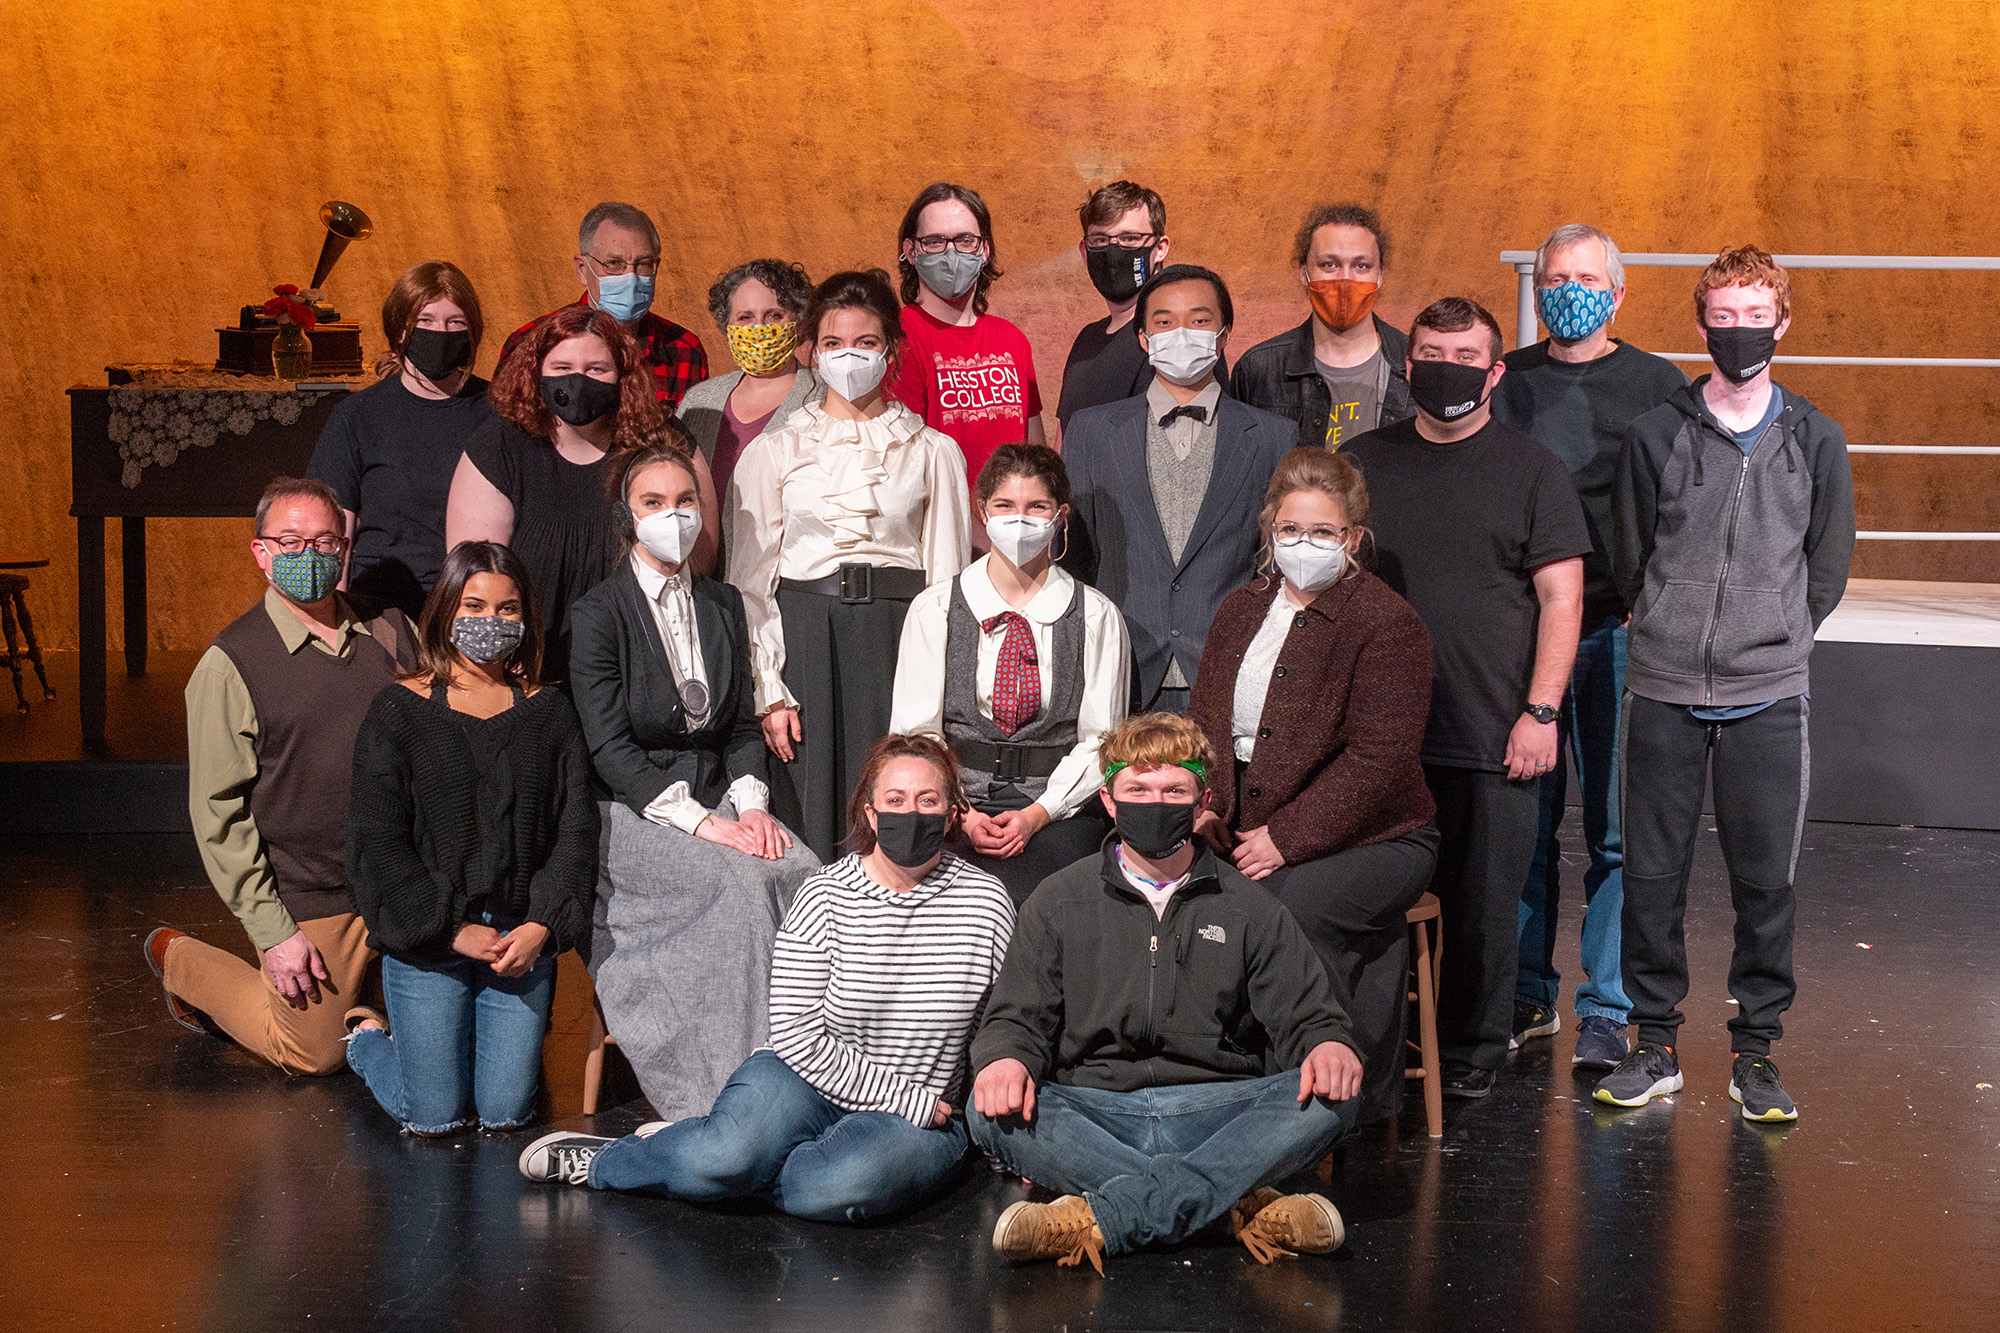 Cast and crew photo from Silent Sky, Hesston College spring 2021